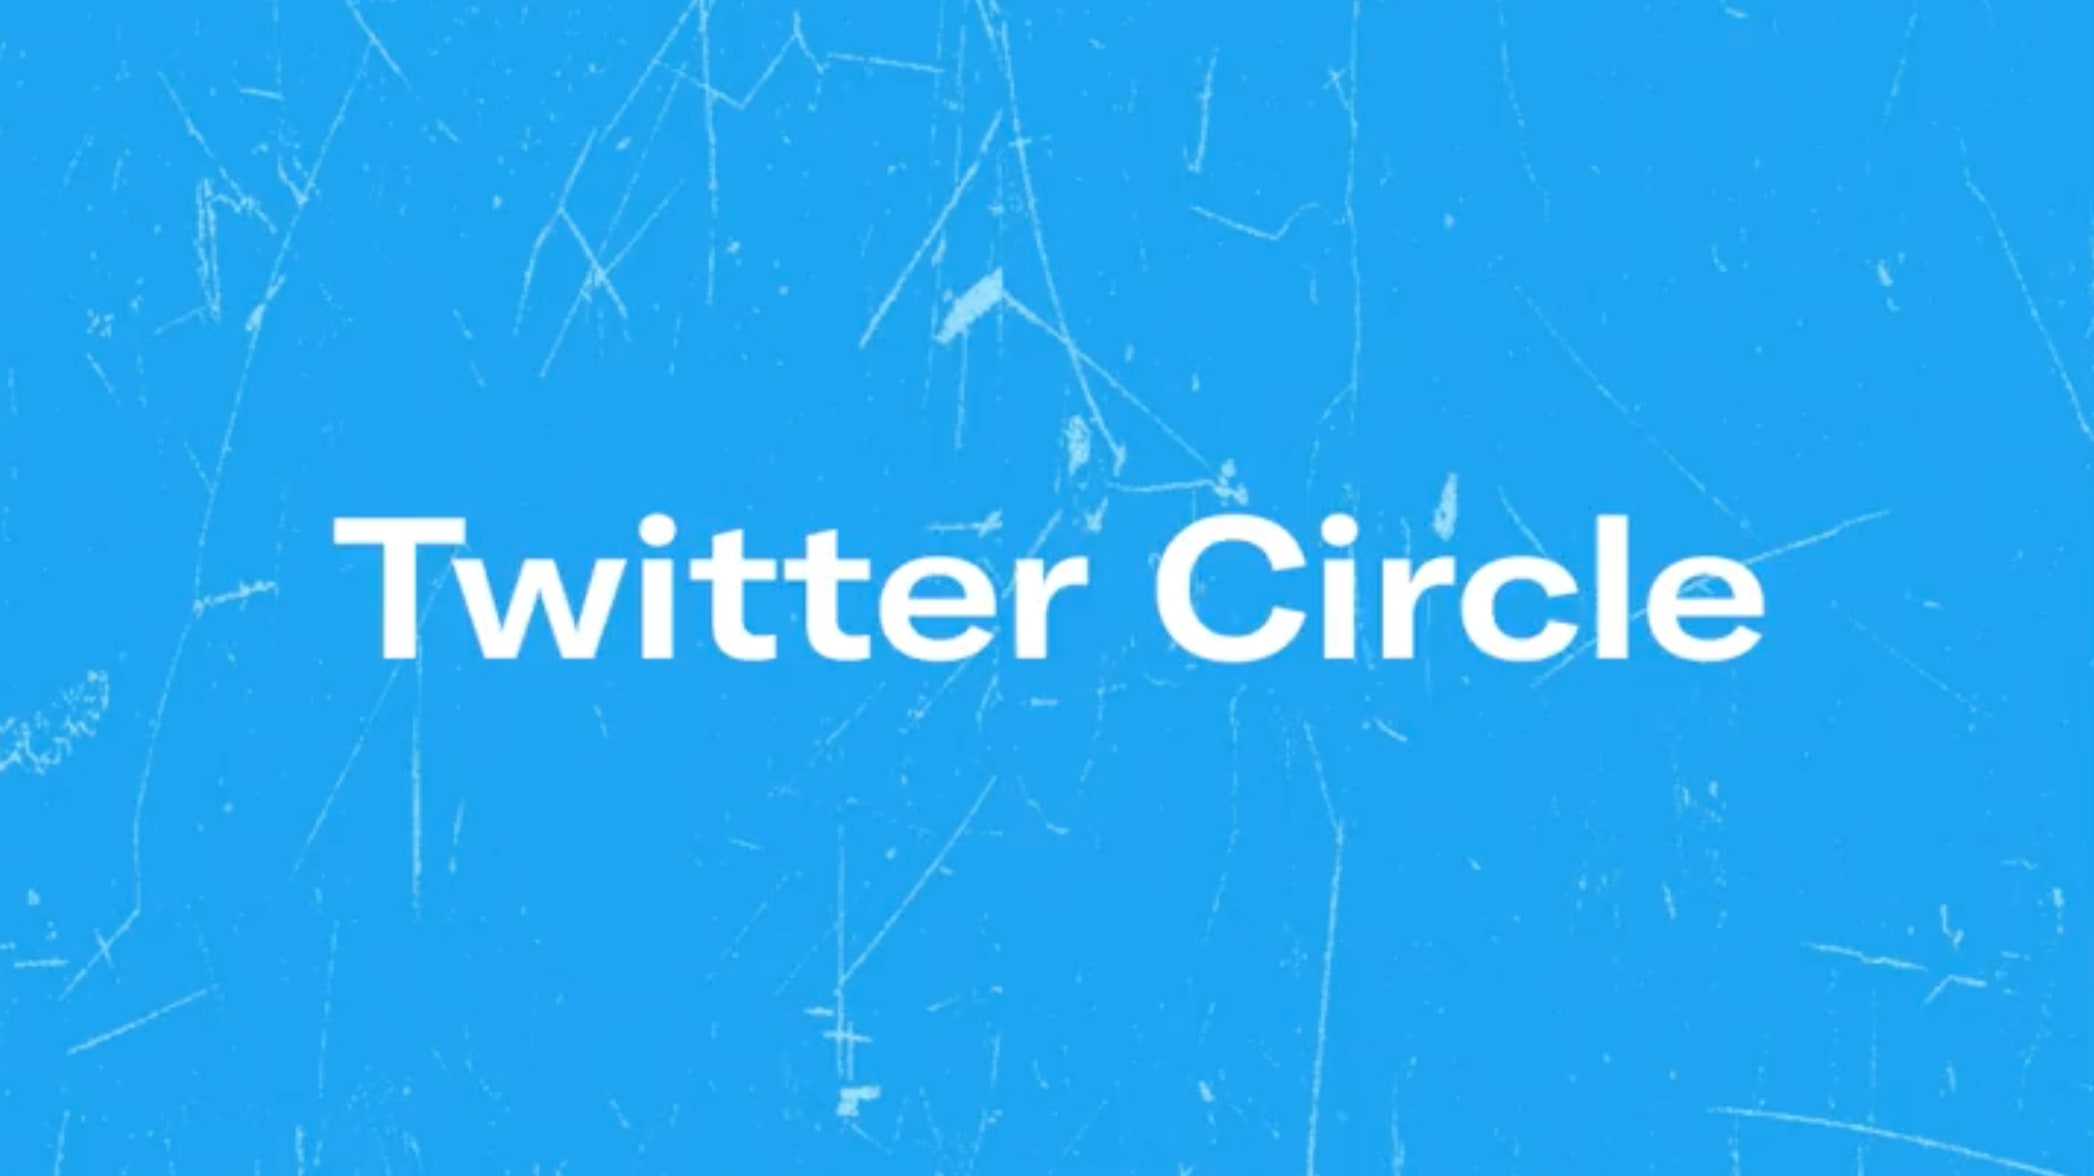 Twitter Circle is for those times when you wanna tweet to a smaller crowd